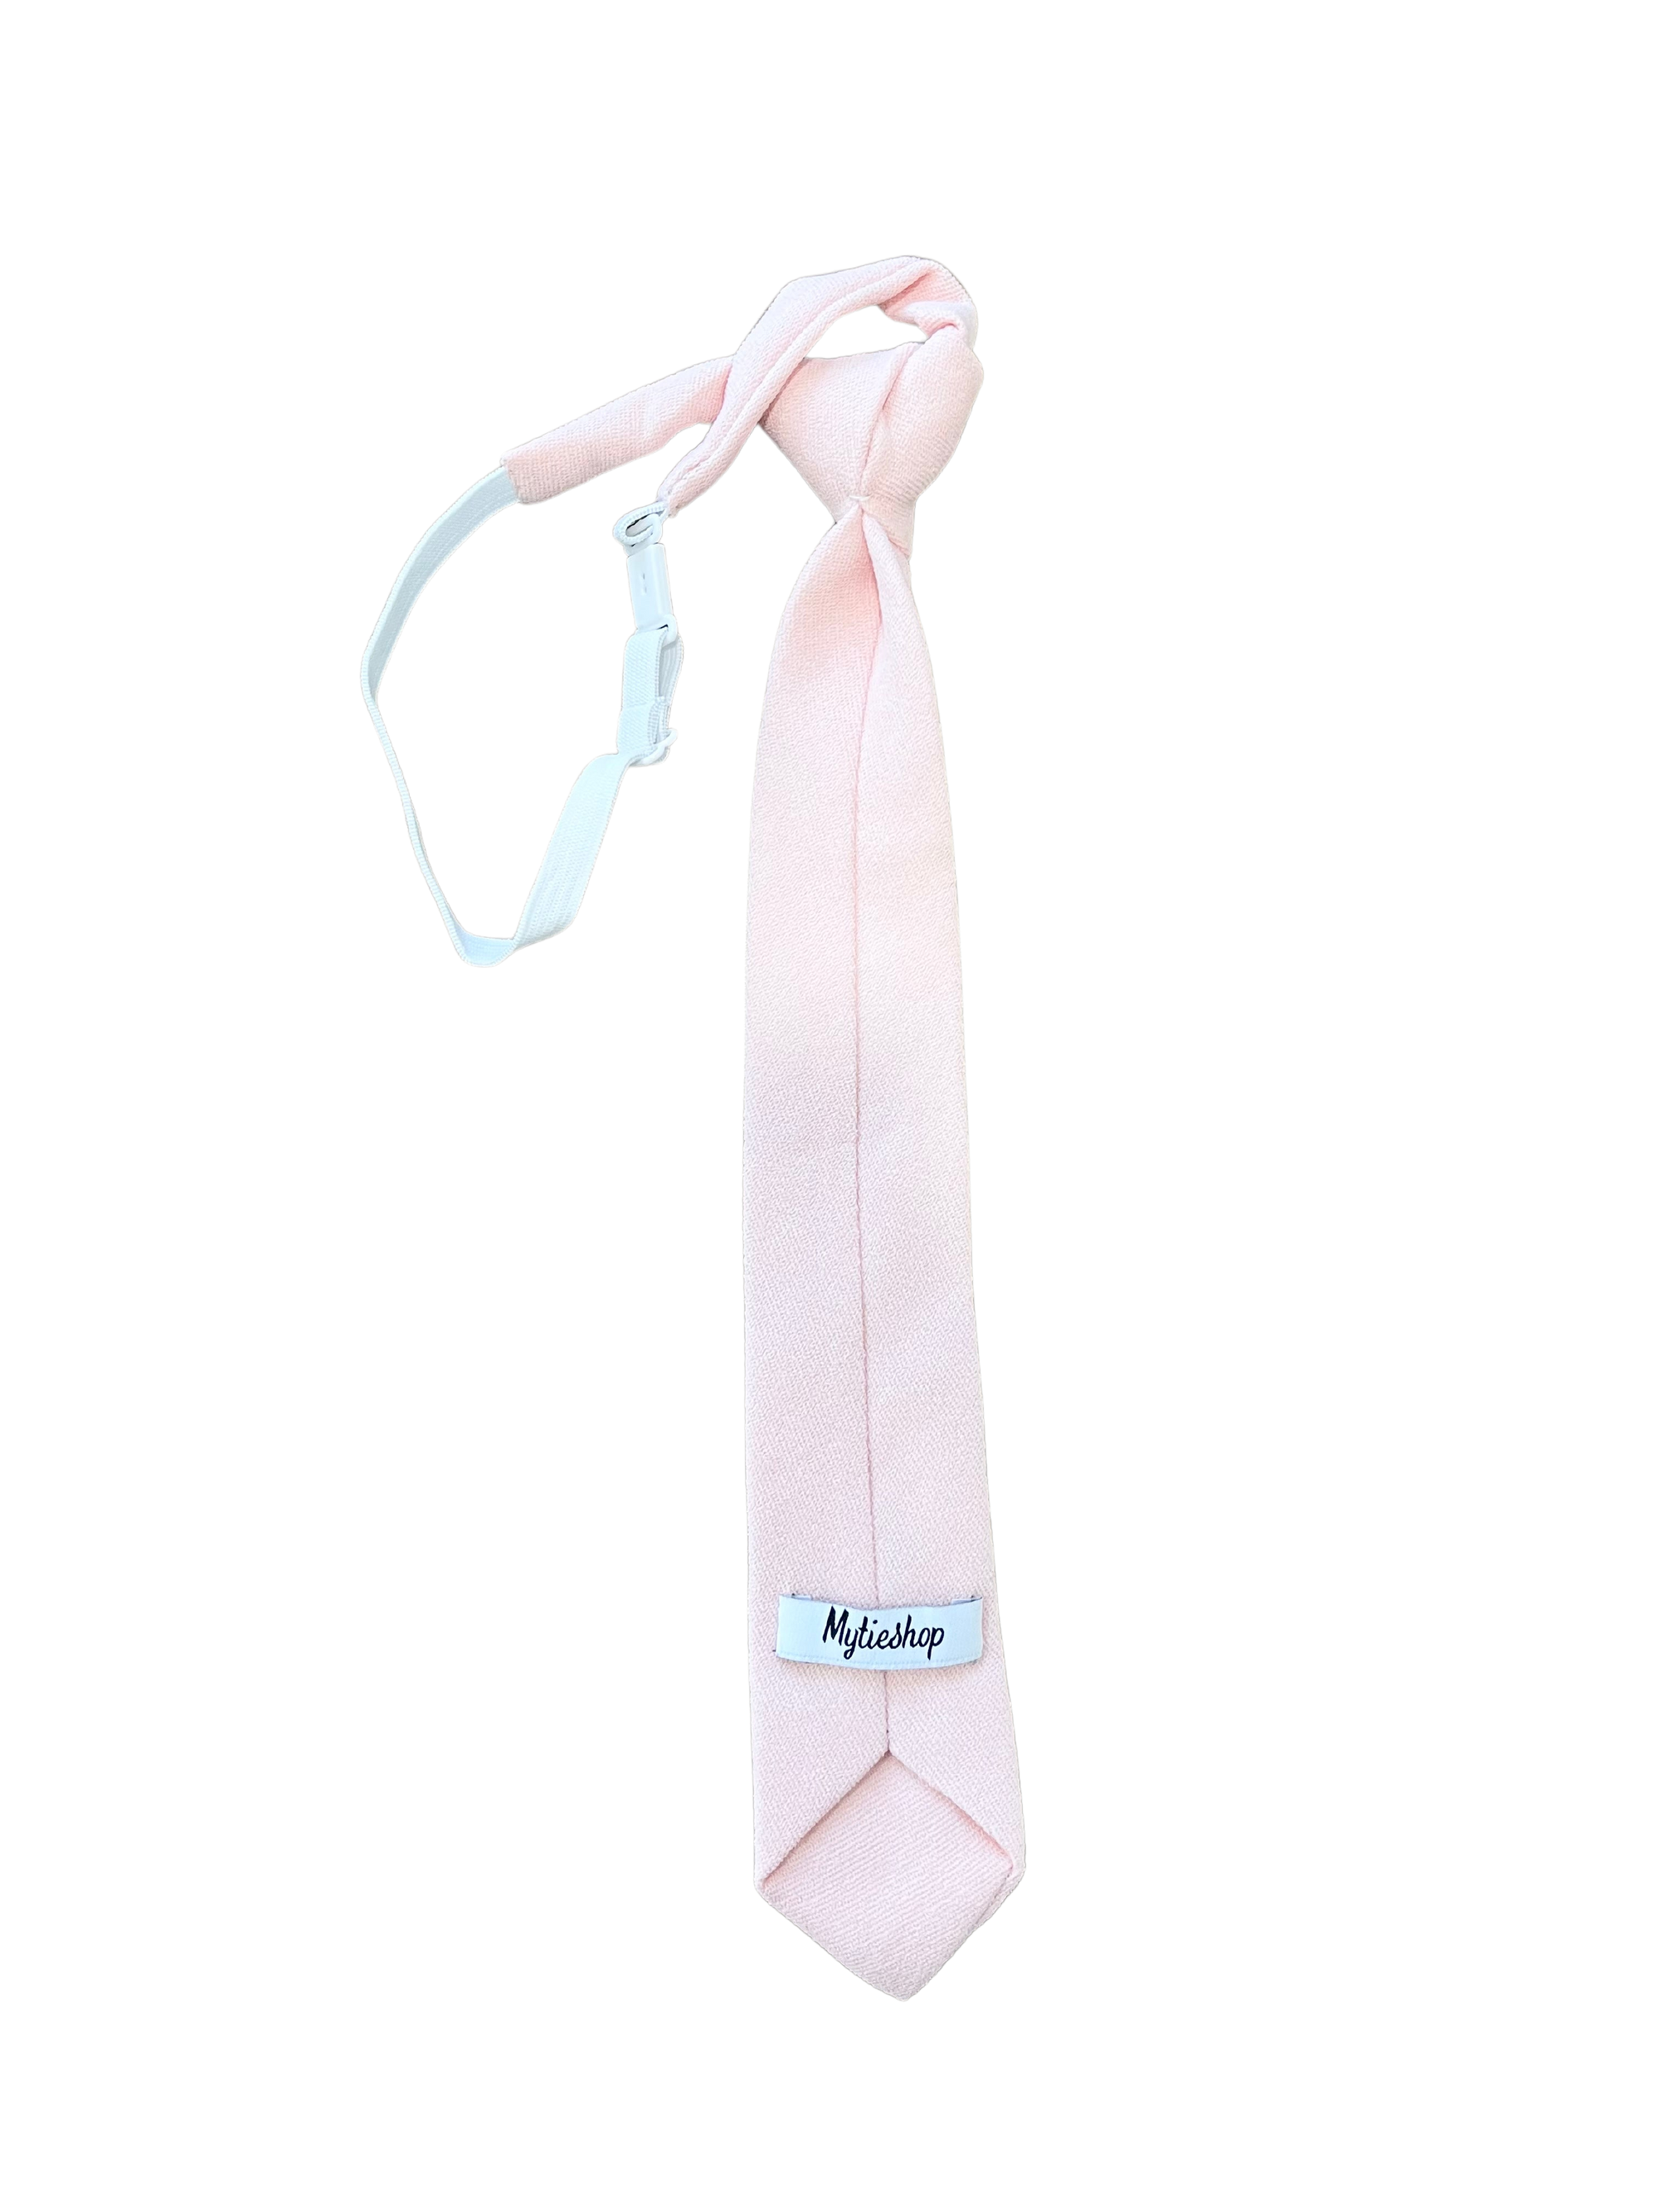 Pink Tie For Kids (Strap) CORA Skinny Fit-Pink Tie For Kids Material: Sued Color: Pink Approx Size: Max width: 6.5 cm / 2.36 inches Length: 37 Cm / 14.56 Inches Have a little one that you need to dress up for a wedding or other formal event? spoil them rotten with this CORA Pink Kids and Toddlers Clip On Tie. This tie is absolutely darling, and will have them looking their best. The clip on design makes it easy to put on and take off, so even the squirmiest of kids can wear it with ease. You&#39;ll 